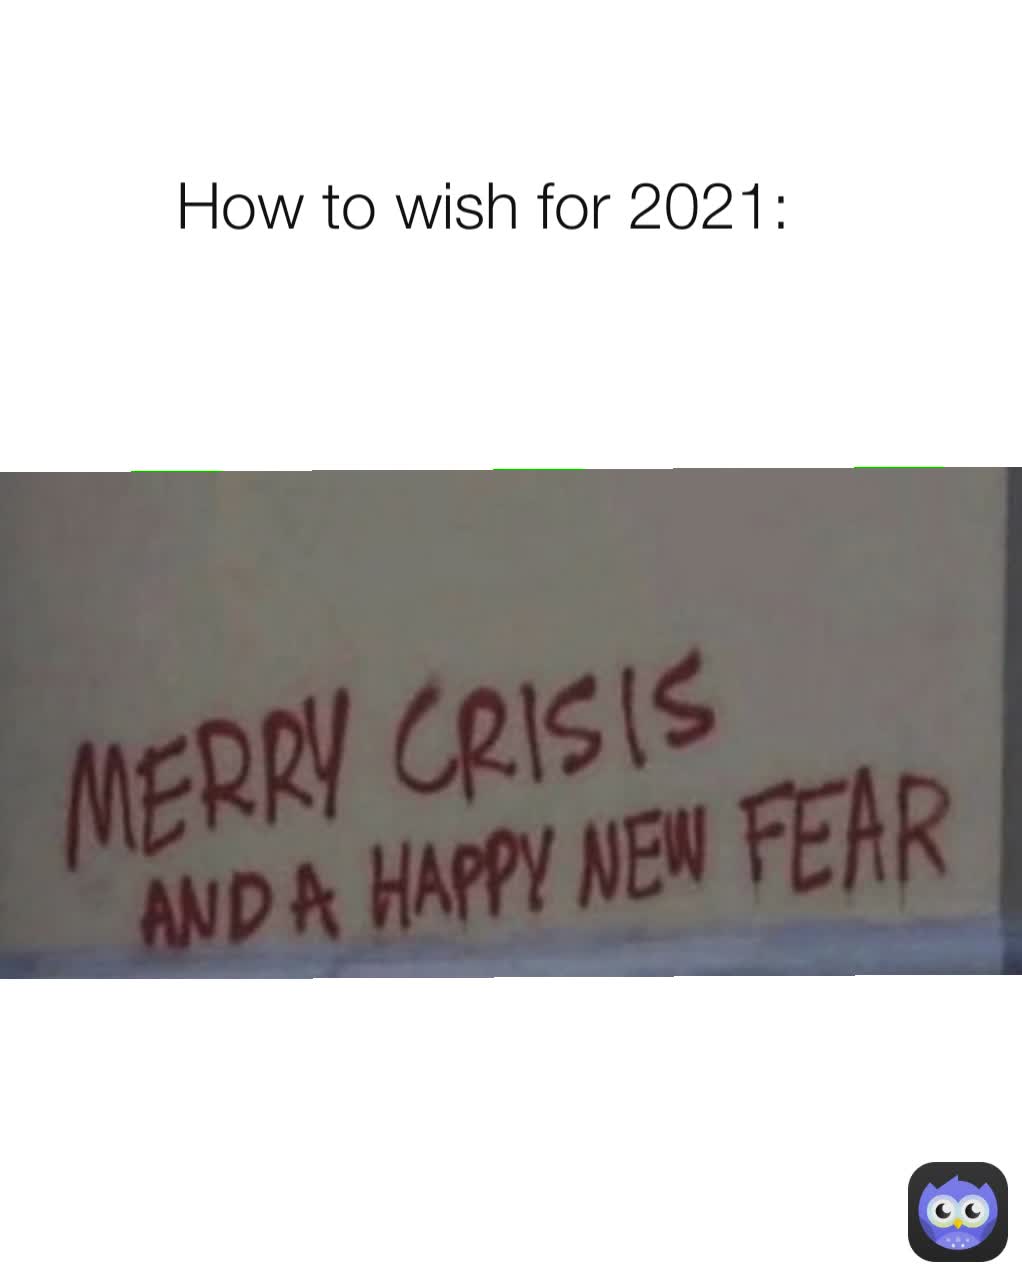 How to wish for 2021: